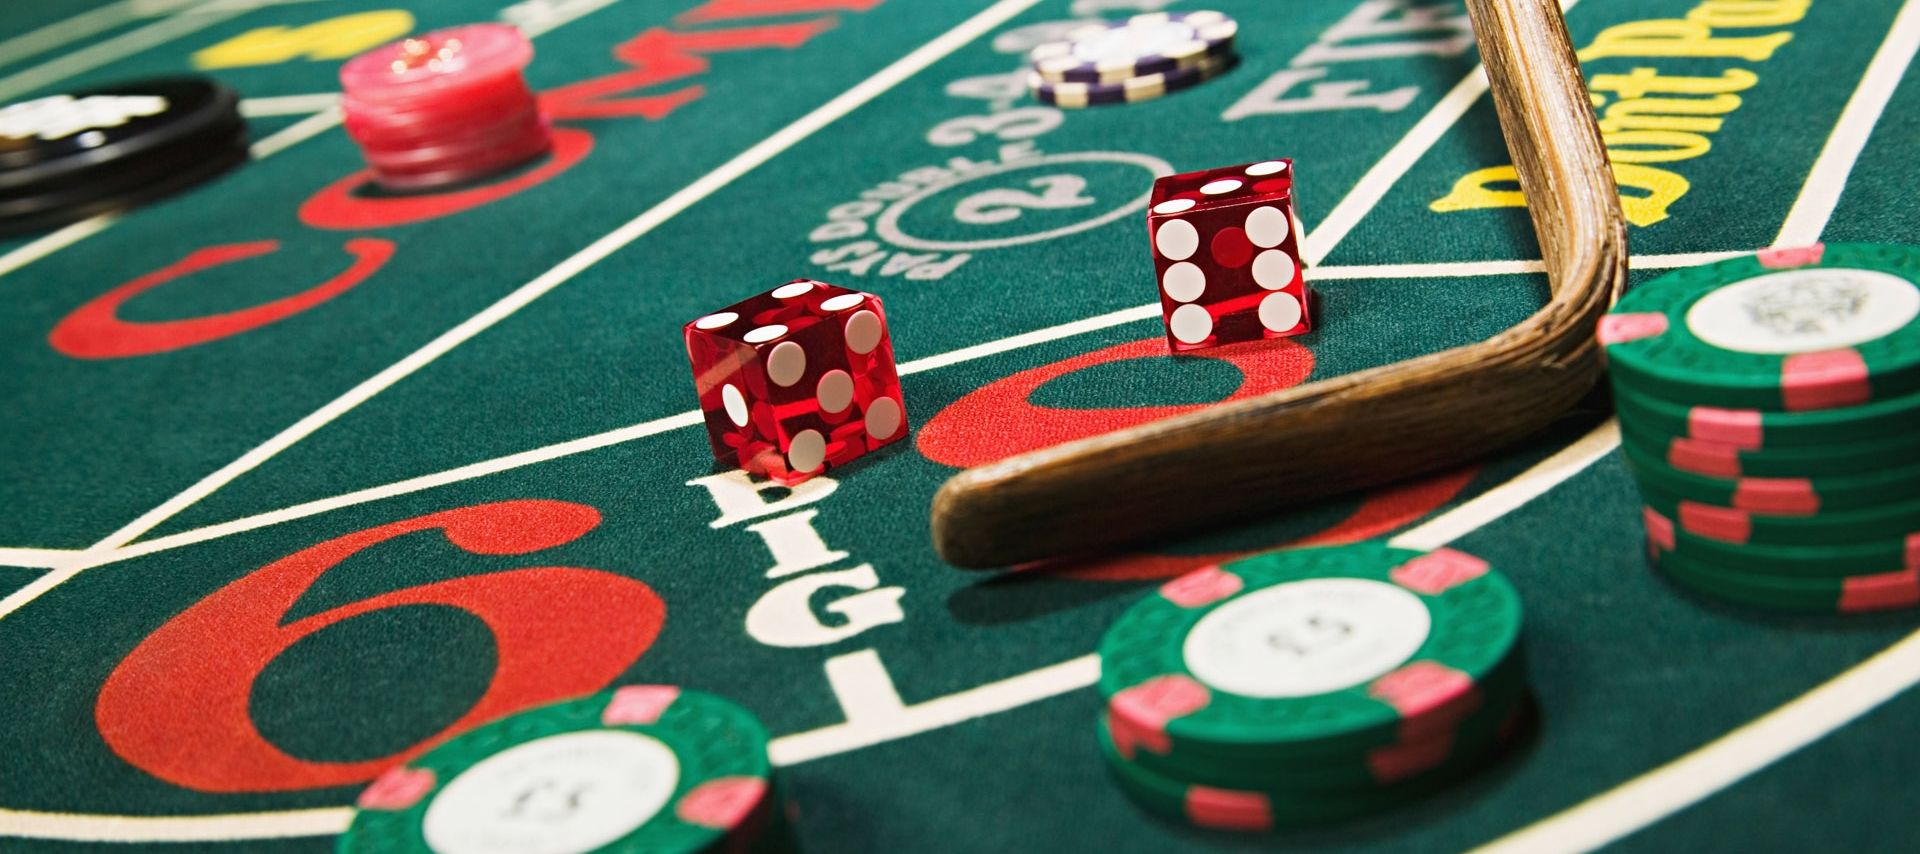 What Are The Most Popular Online Casino Games?